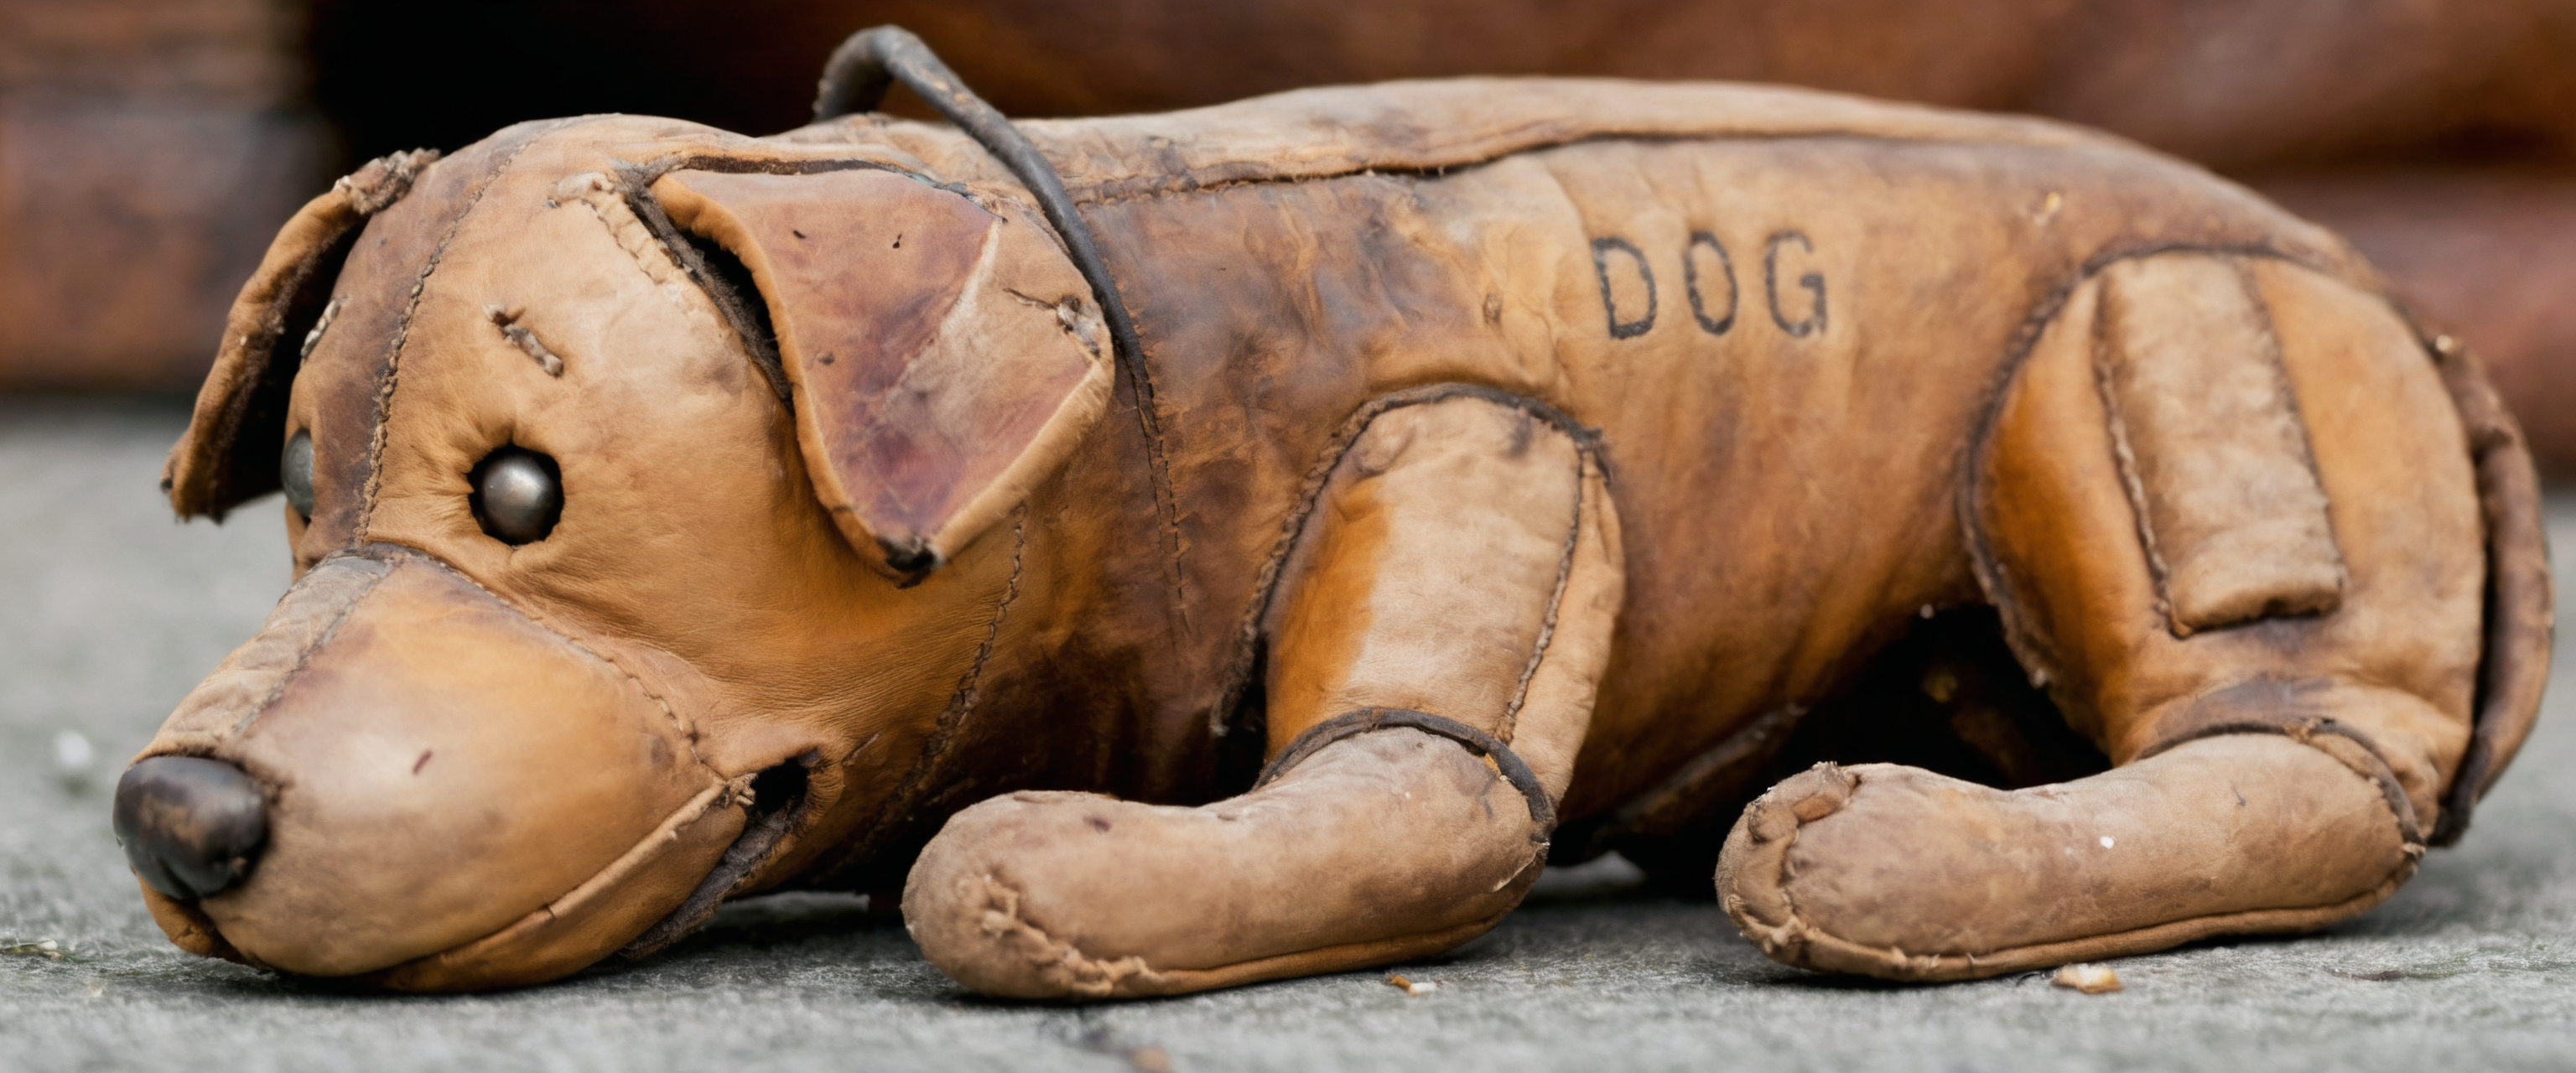 a used leather dog